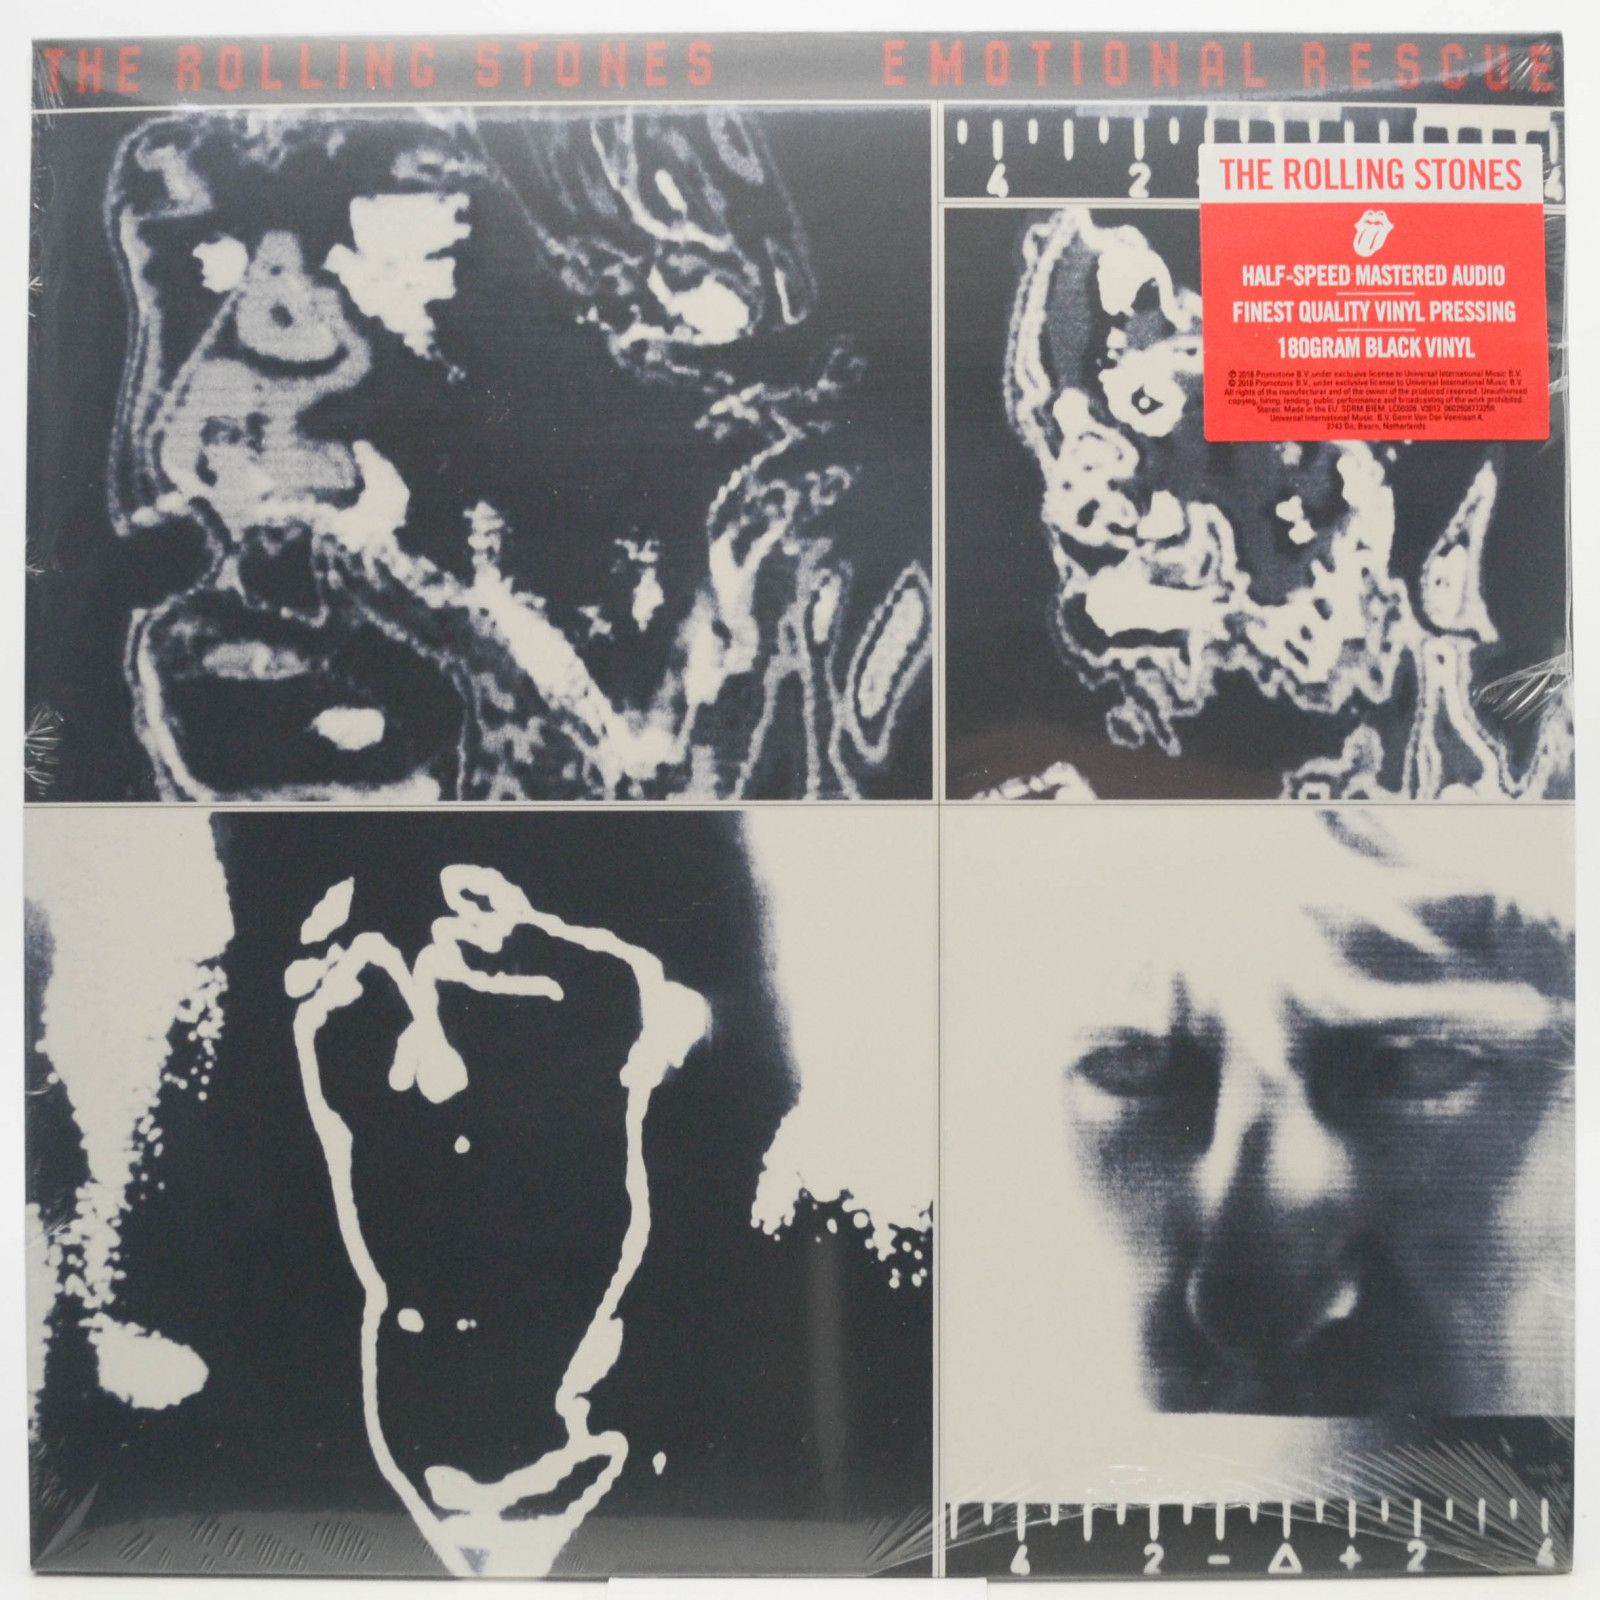 Rolling Stones — Emotional Rescue, 1980